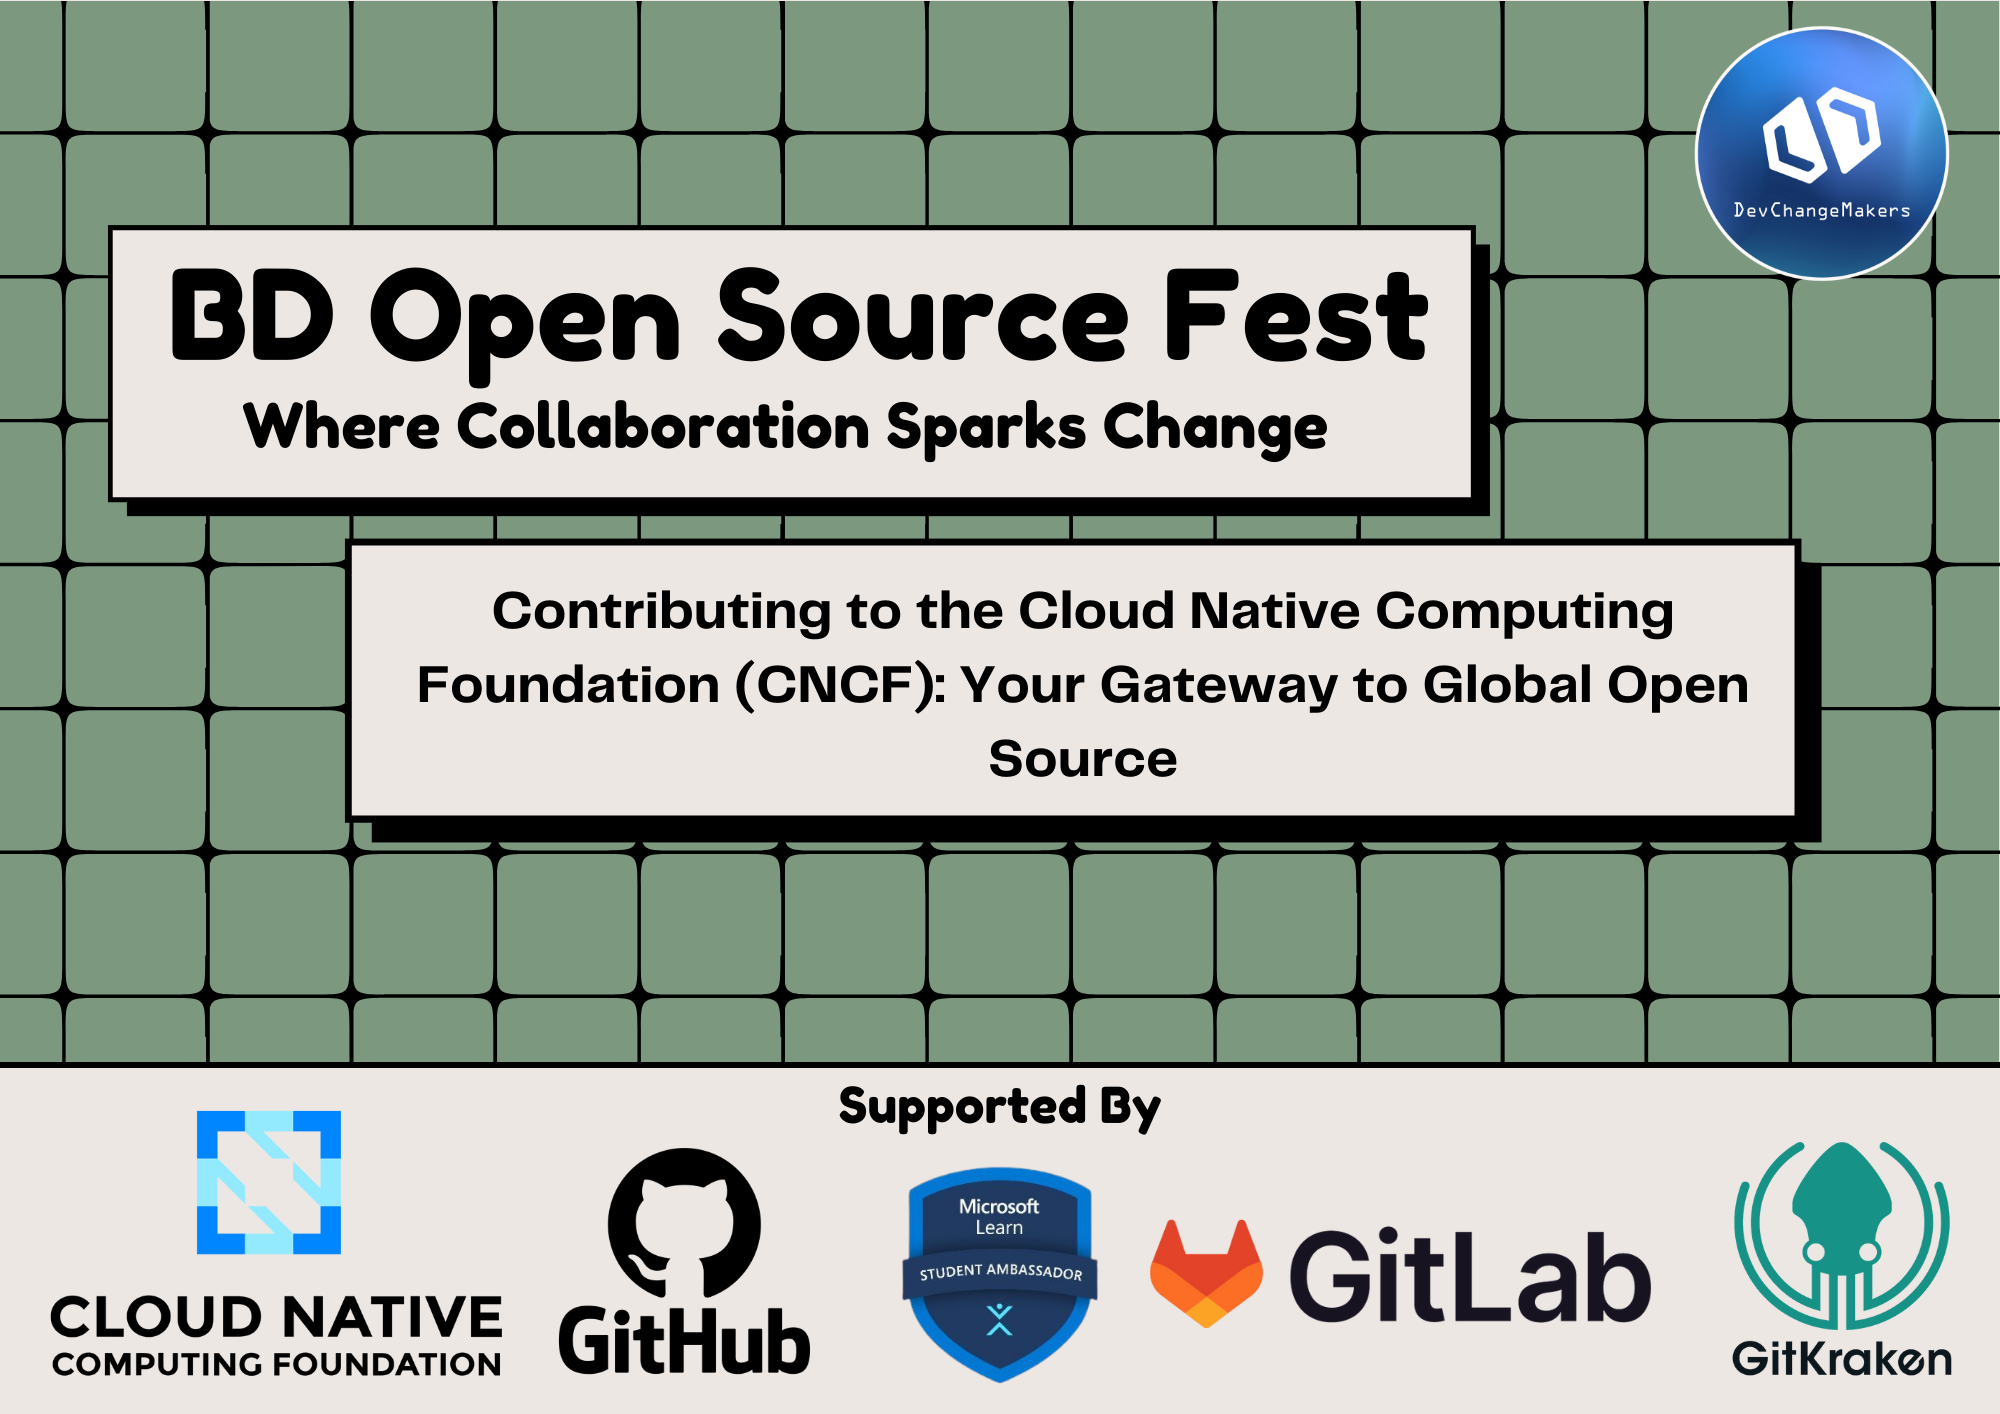 Contributing to the Cloud Native Computing Foundation (CNCF): Your Gateway to Global Open Source